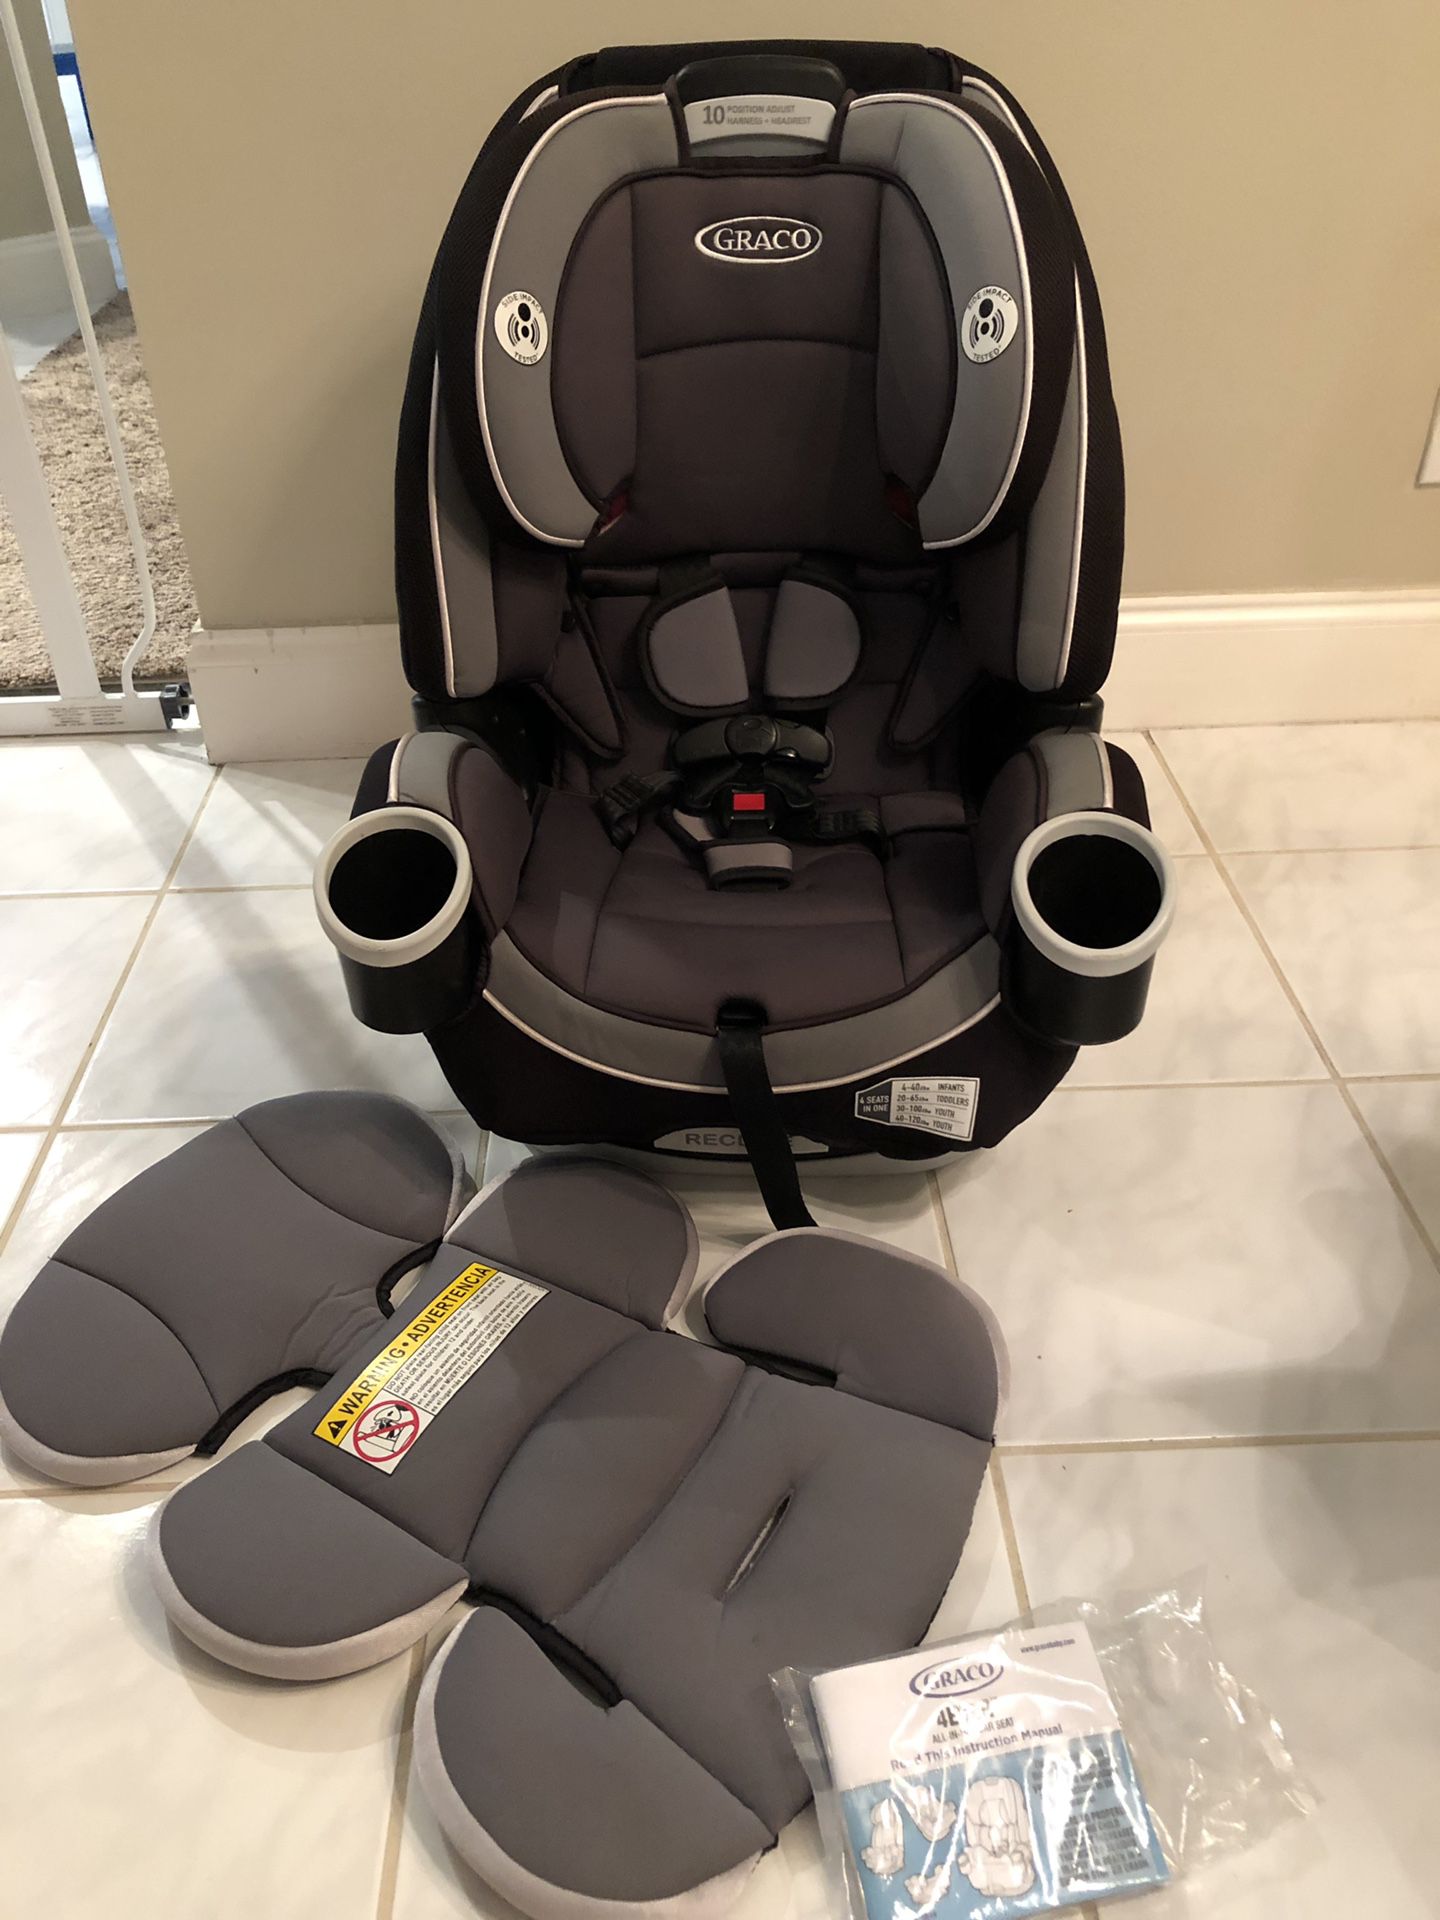 Graco 4ever all in one convertible car seat